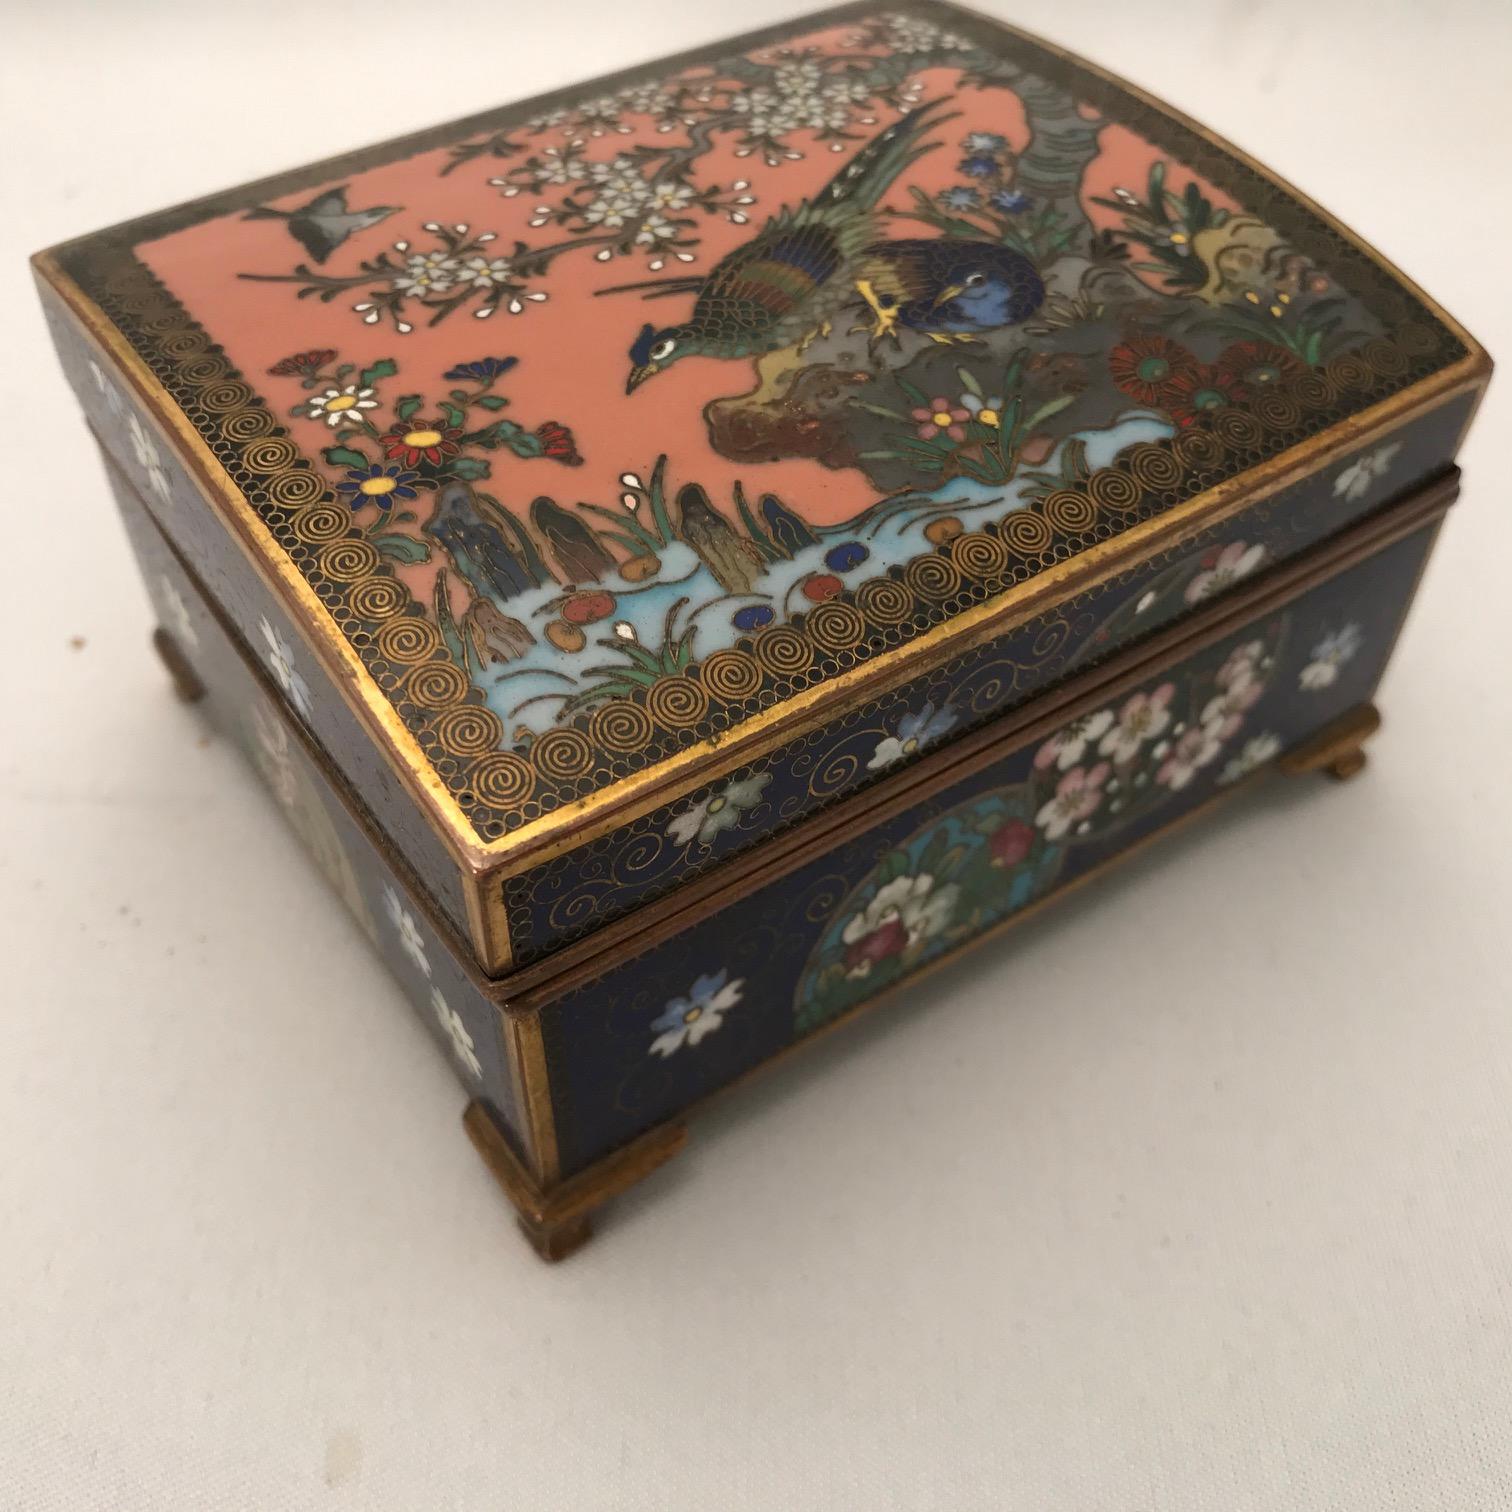 Brass Japanese Cloisonné Box with Birds and Flowers